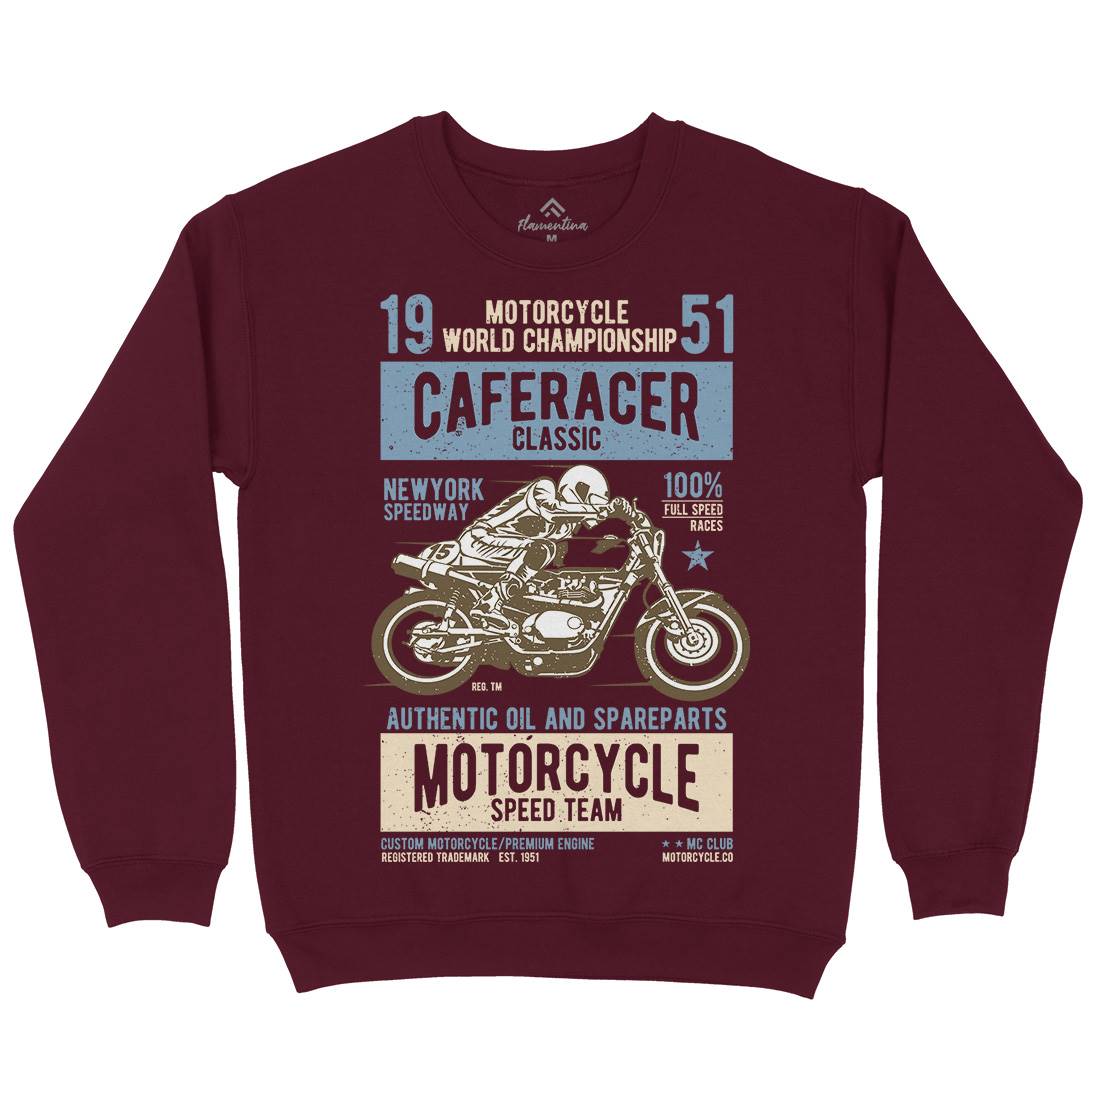 Caferacer Mens Crew Neck Sweatshirt Motorcycles A629